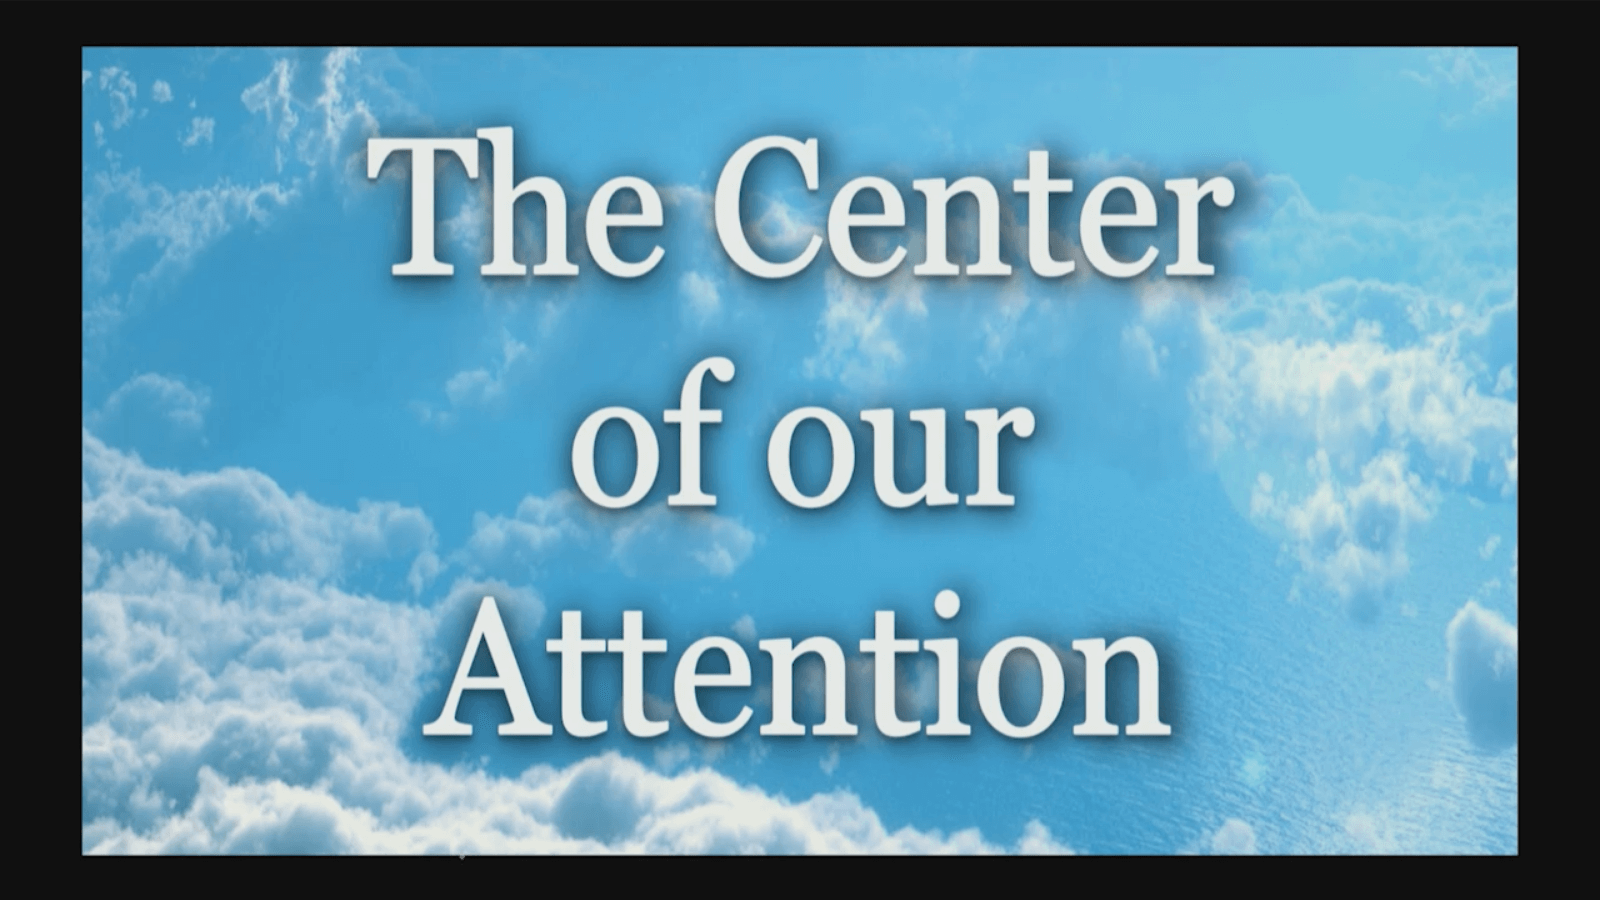 The Center of our Attention